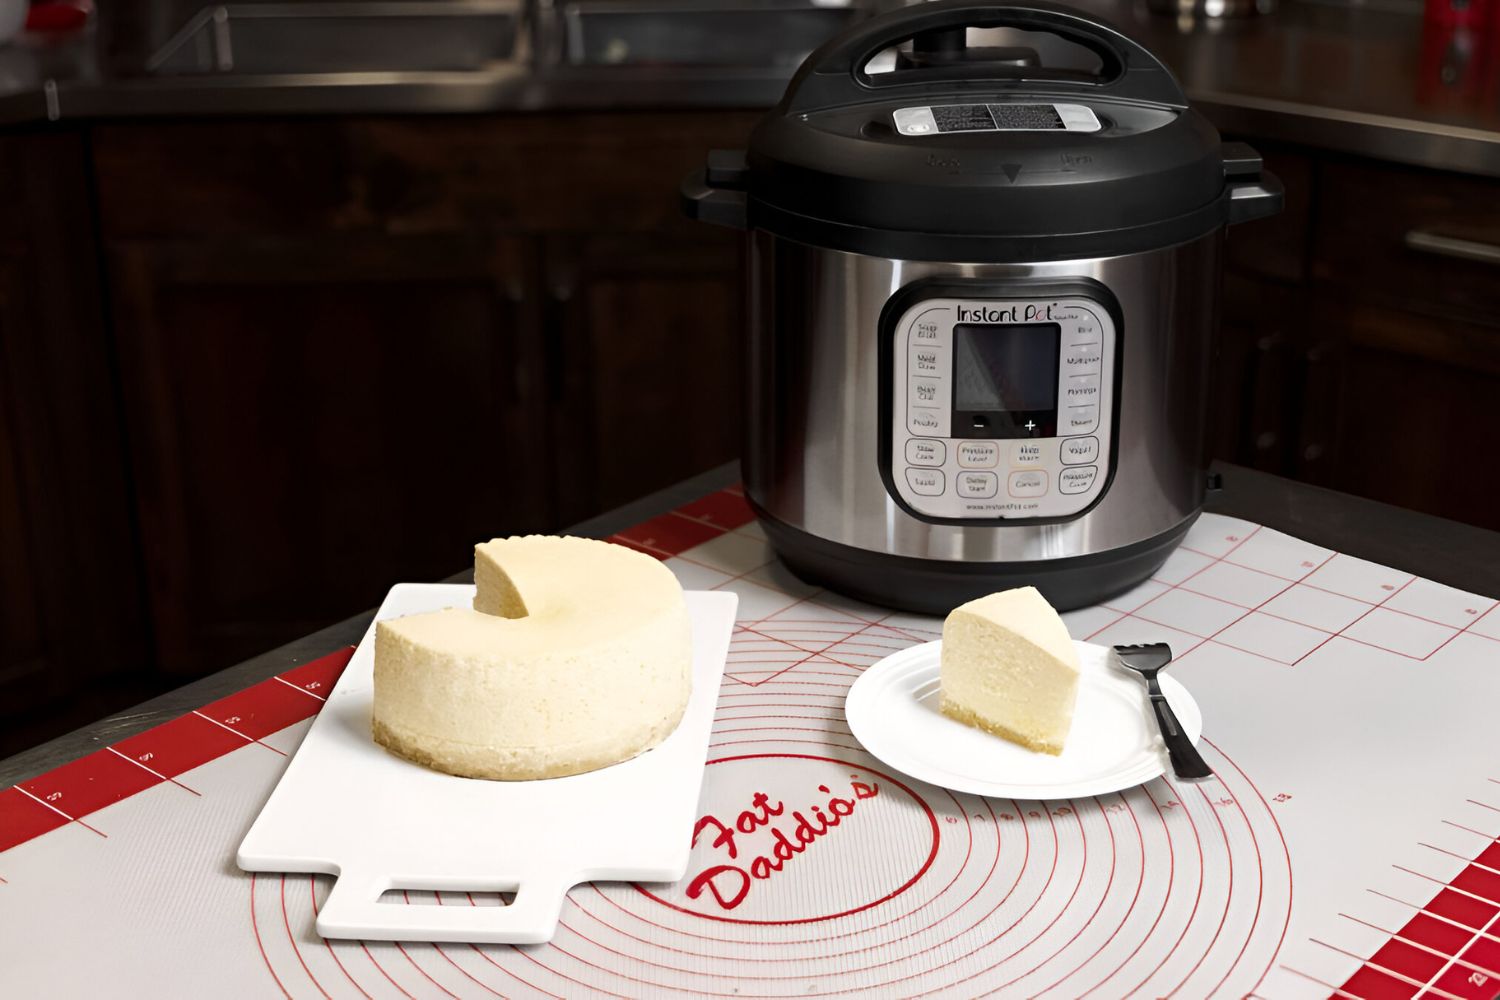 How To Bake Cheesecake In An Electric Pressure Cooker